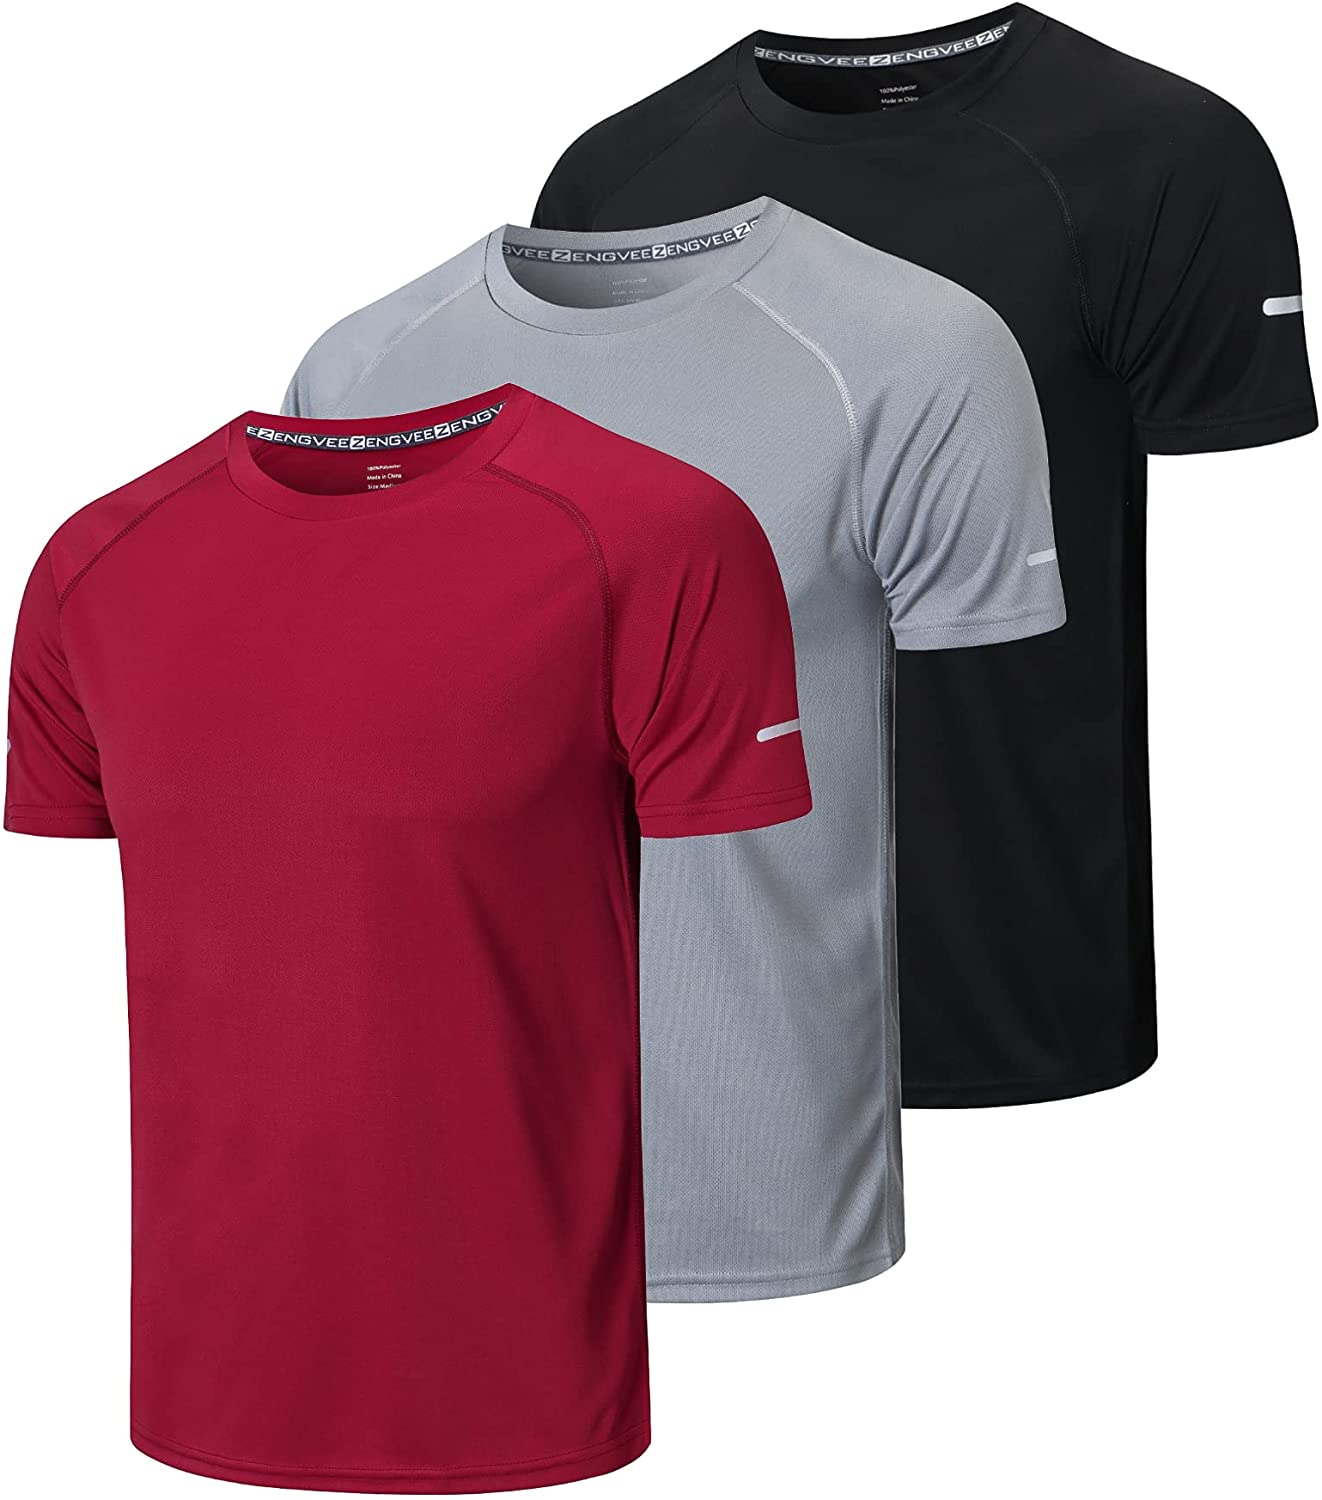 Men's 3 Pack Workout Dry Fit Shirts